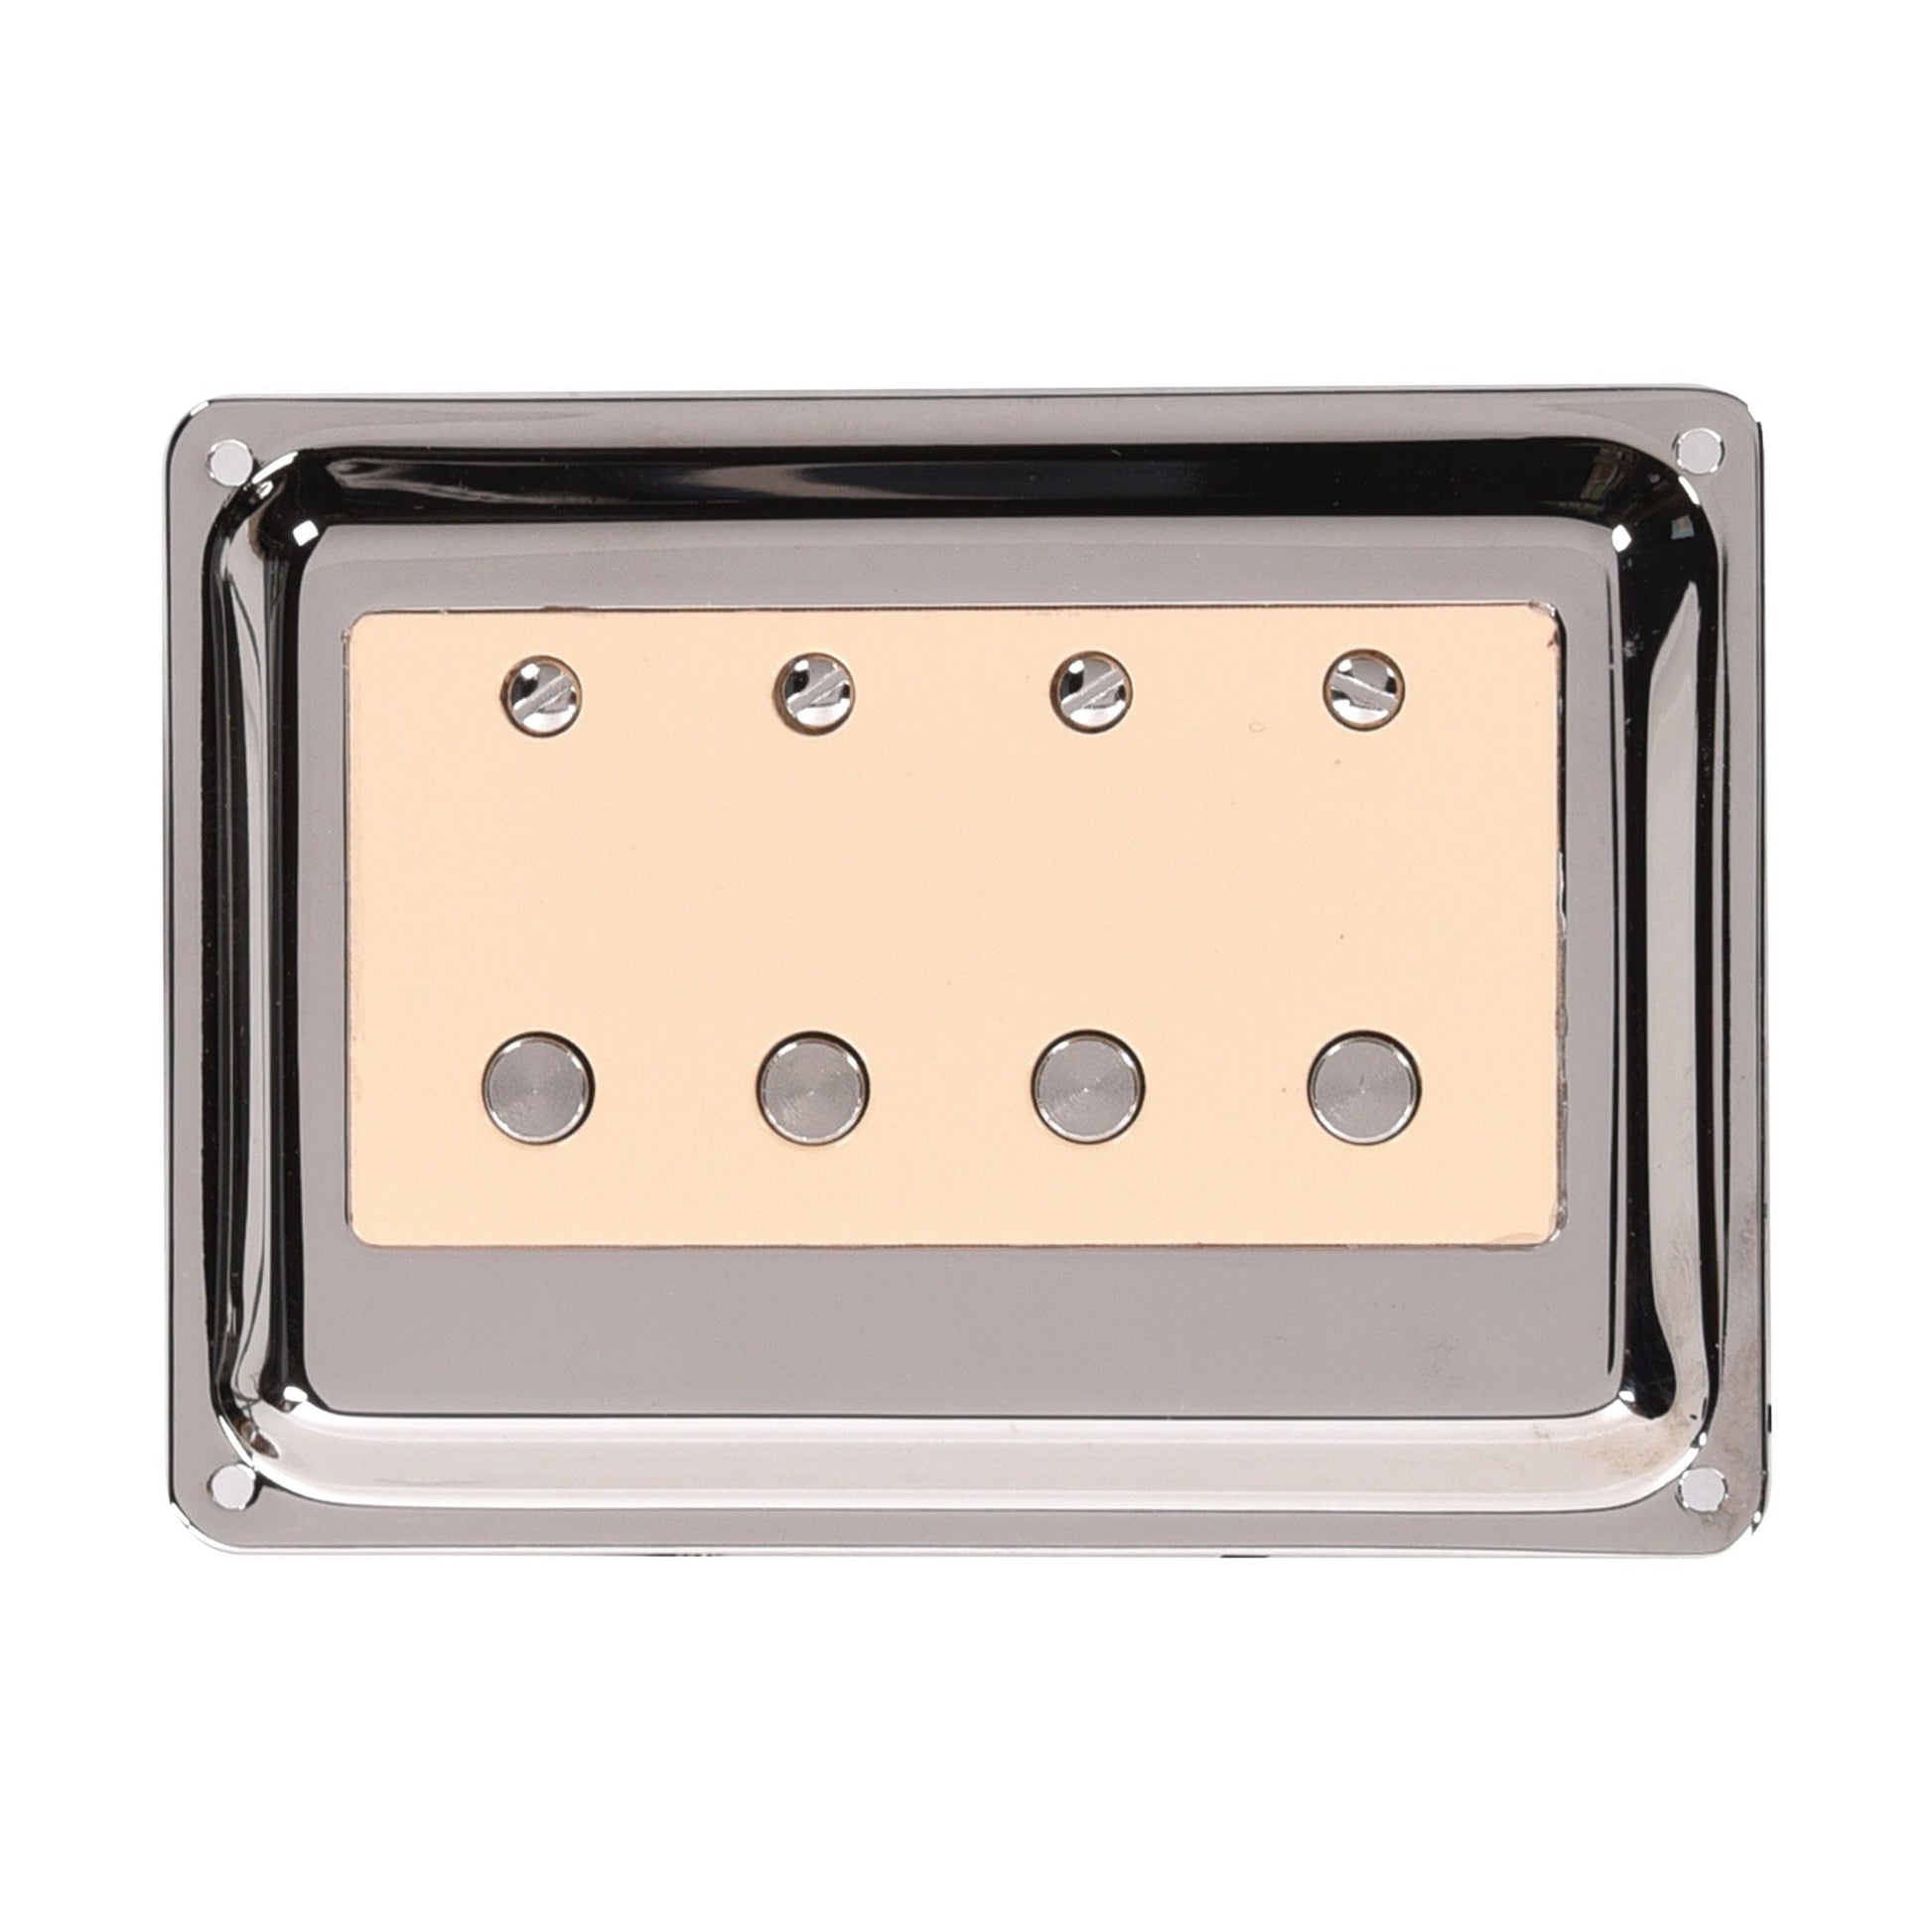 Curtis Novak BS-DS Bass Pickup Vintage 15.6mm String Spacing (Hagstrom Bisonic, Starfire, and Gibson) Neck Cream Parts / Guitar Pickups